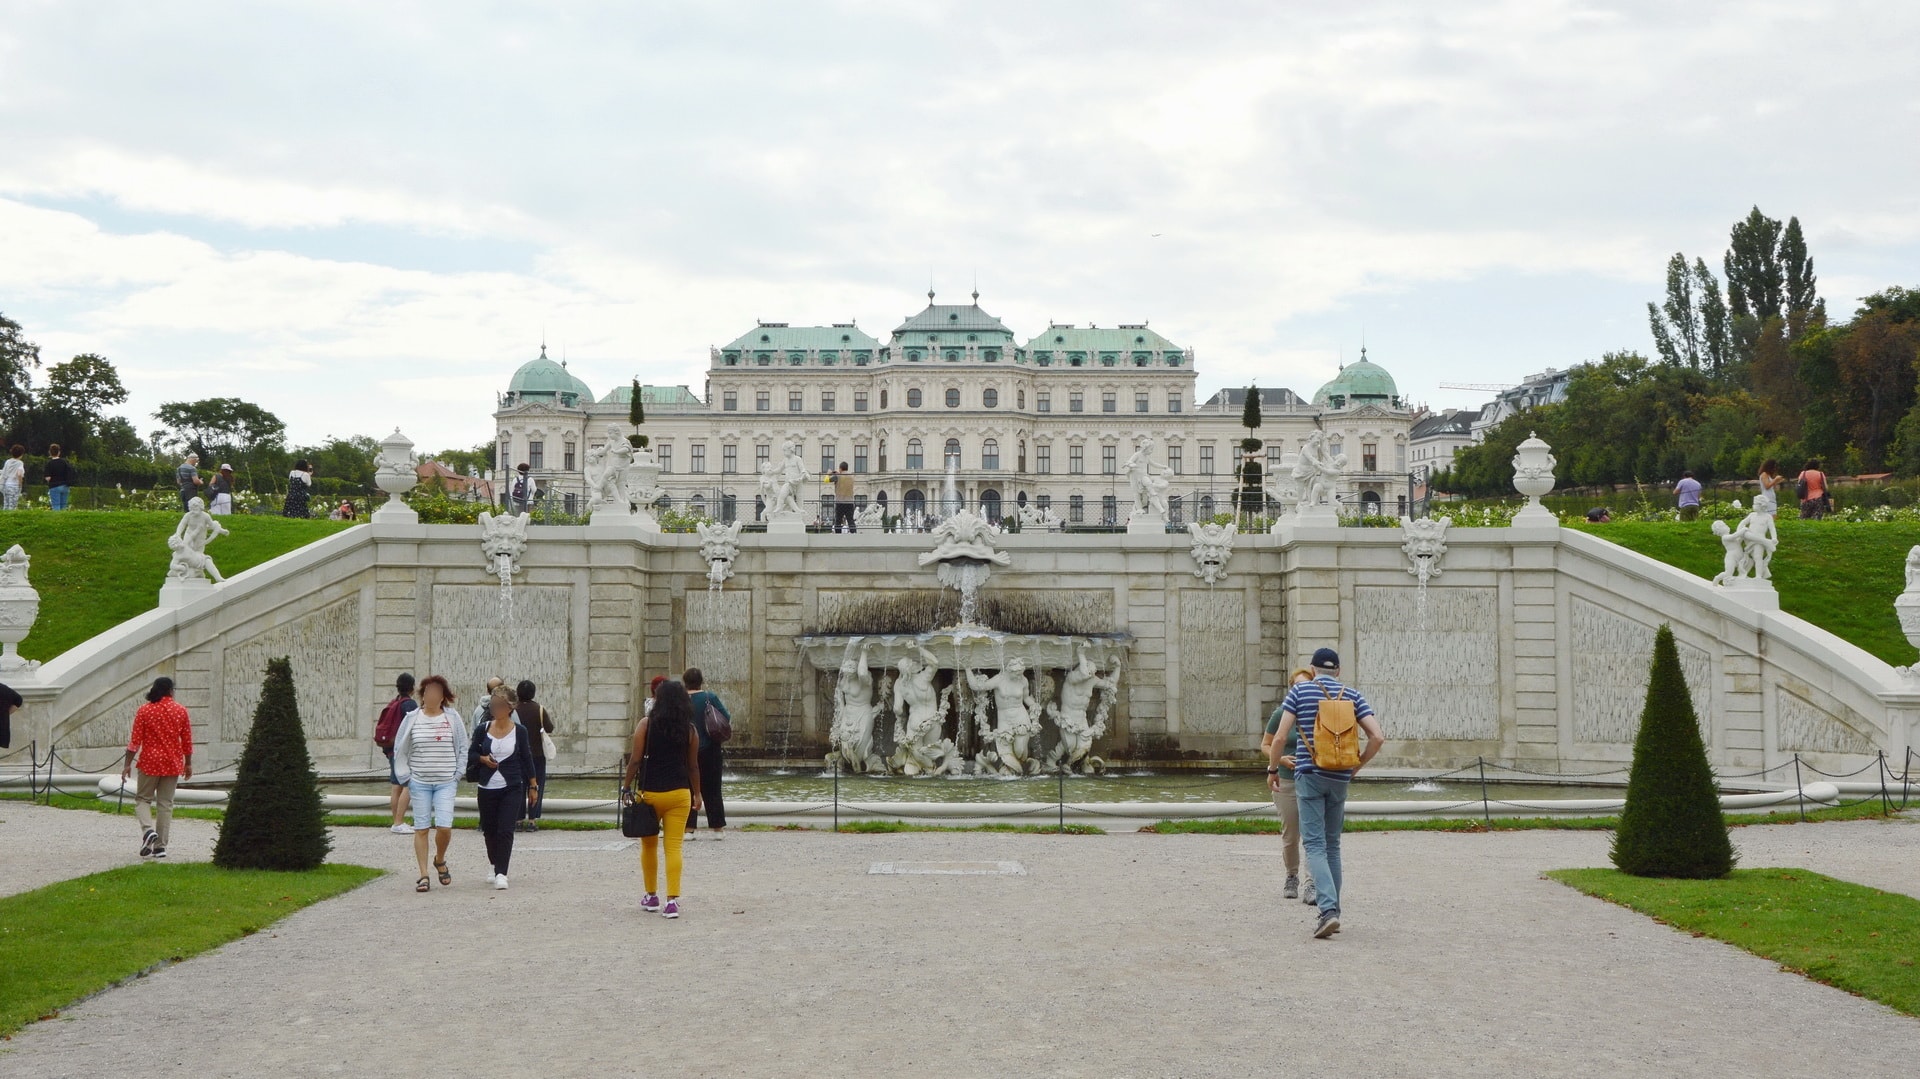 View of the Upper Belvedere from palace gardens